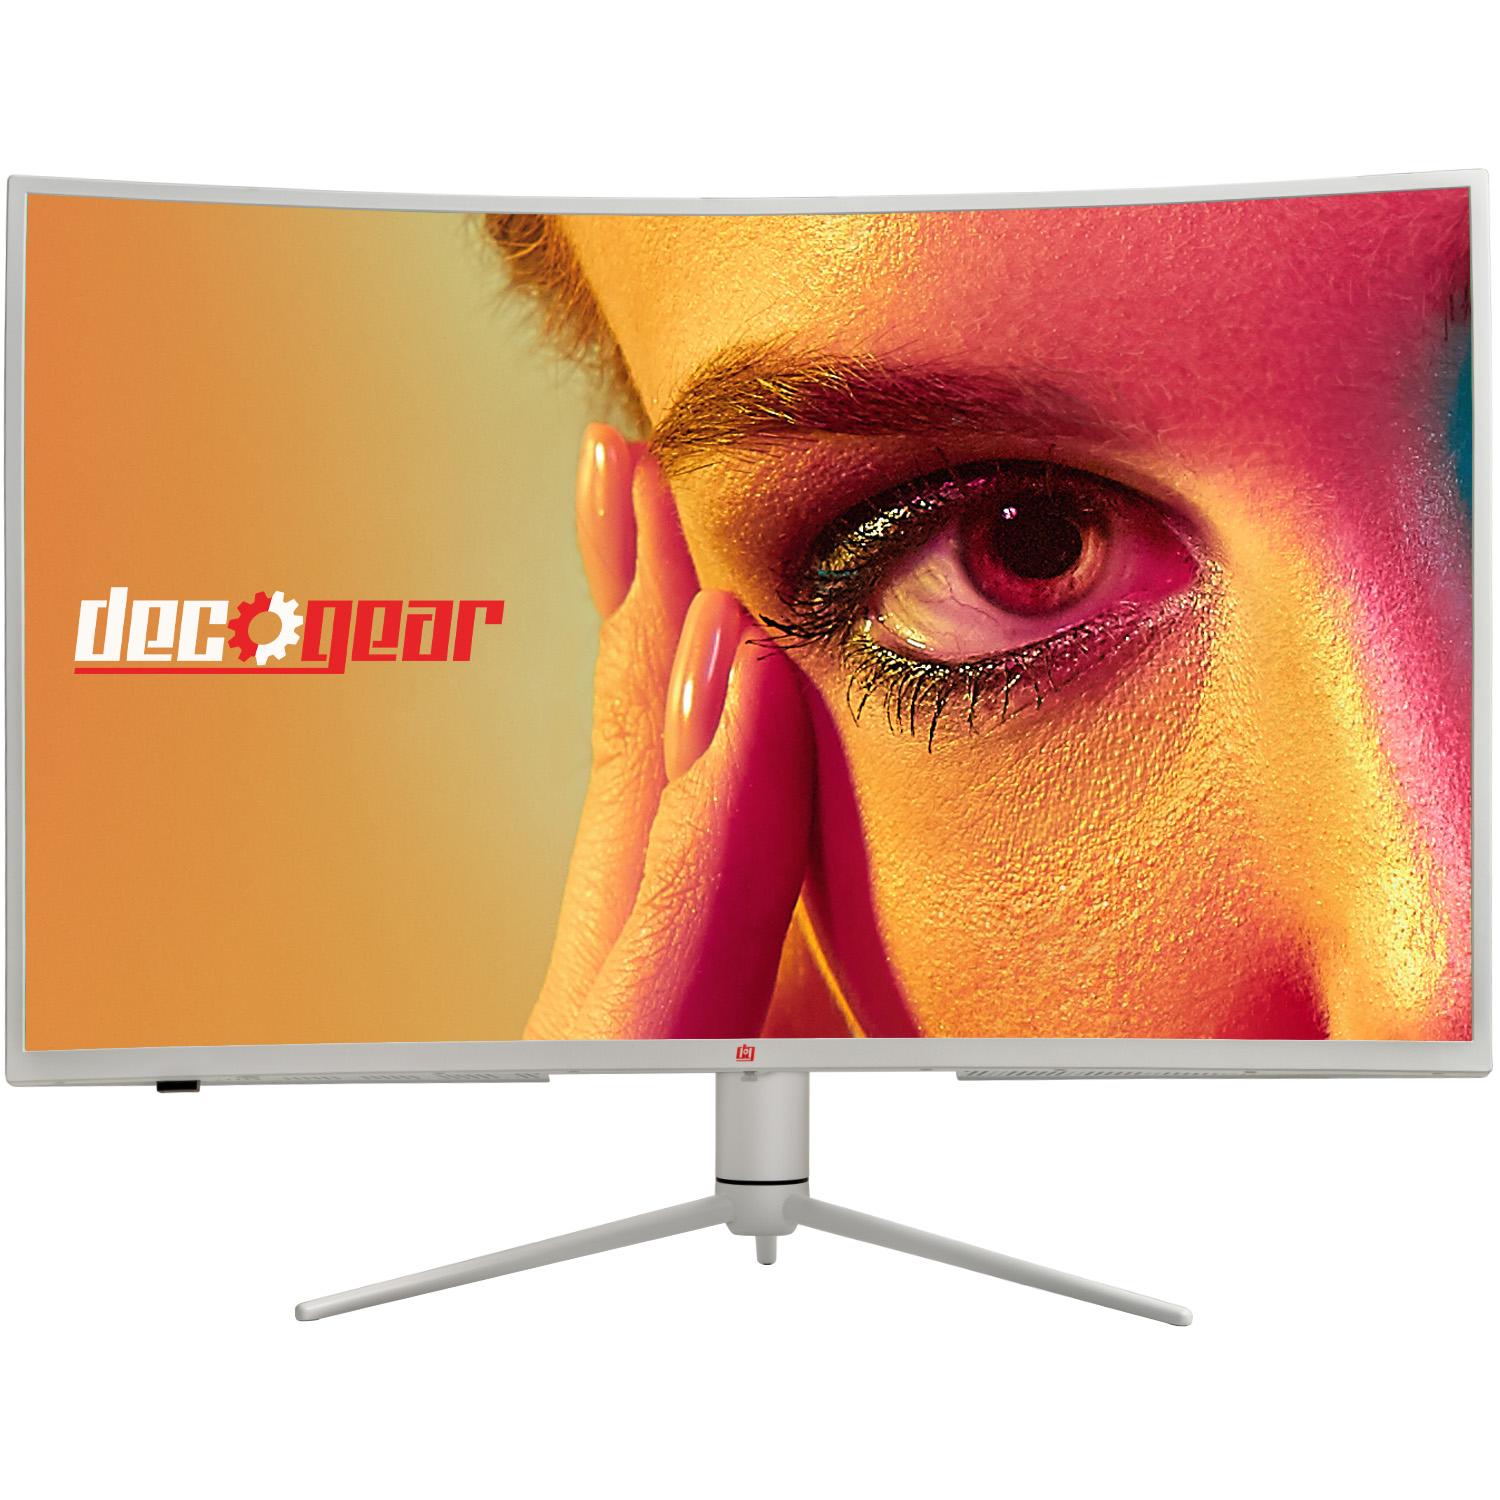 Deco Gear 39" Curved Ultrawide Gaming Monitor, 2560x1440, HDR400, 165Hz, White - image 1 of 9